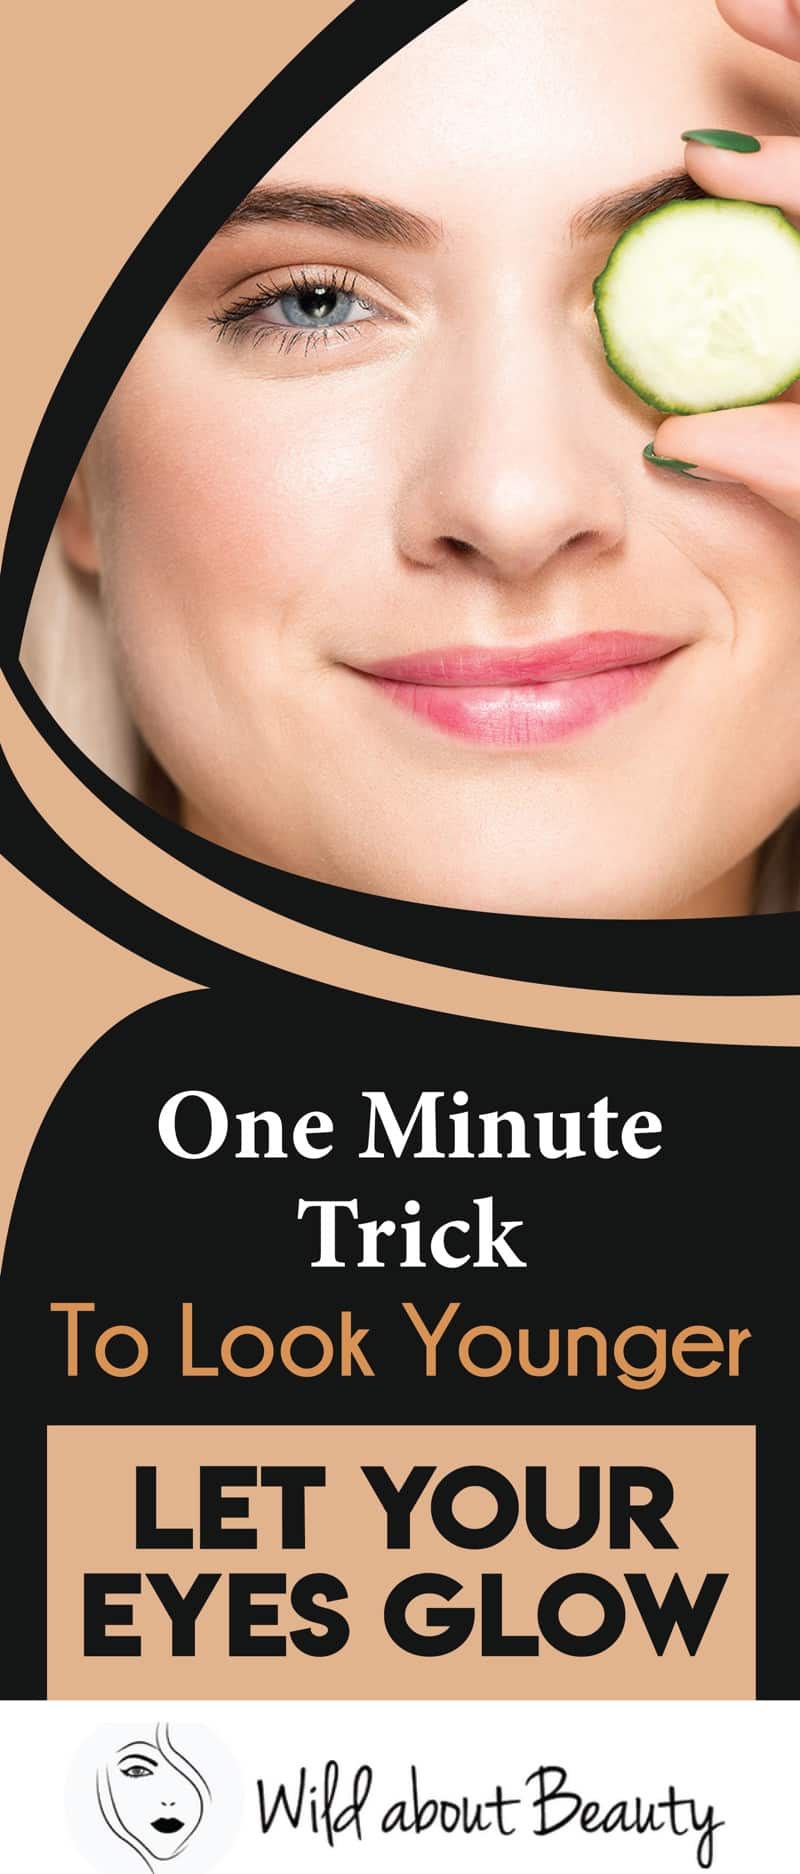 One Minute Trick To Look Younger